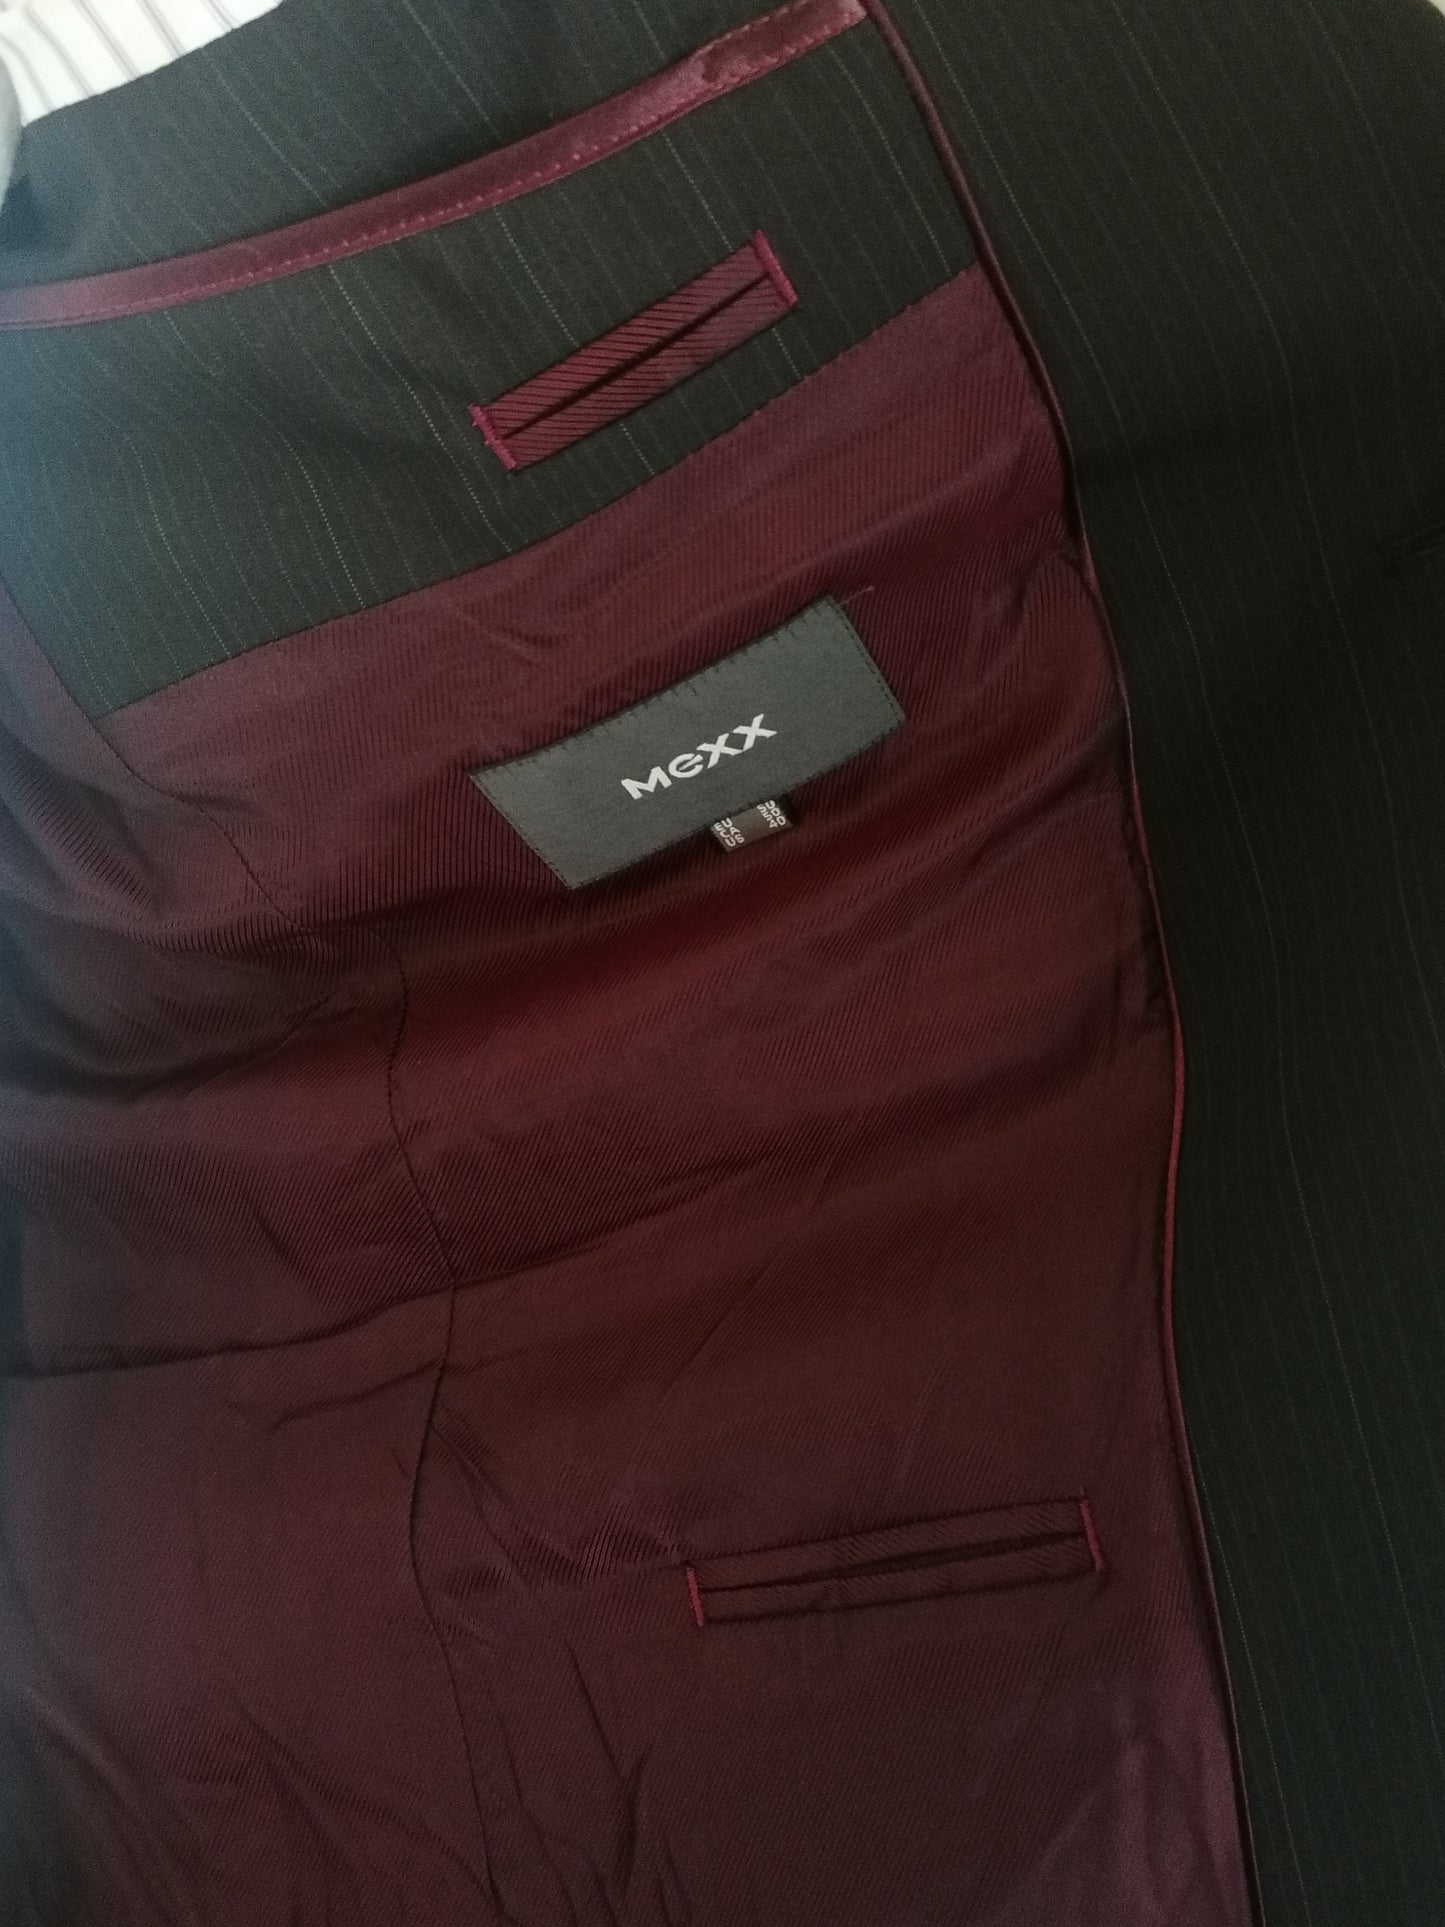 Mexx costume. Black with burgundy blue and white thin stripe. Size 50 / M.